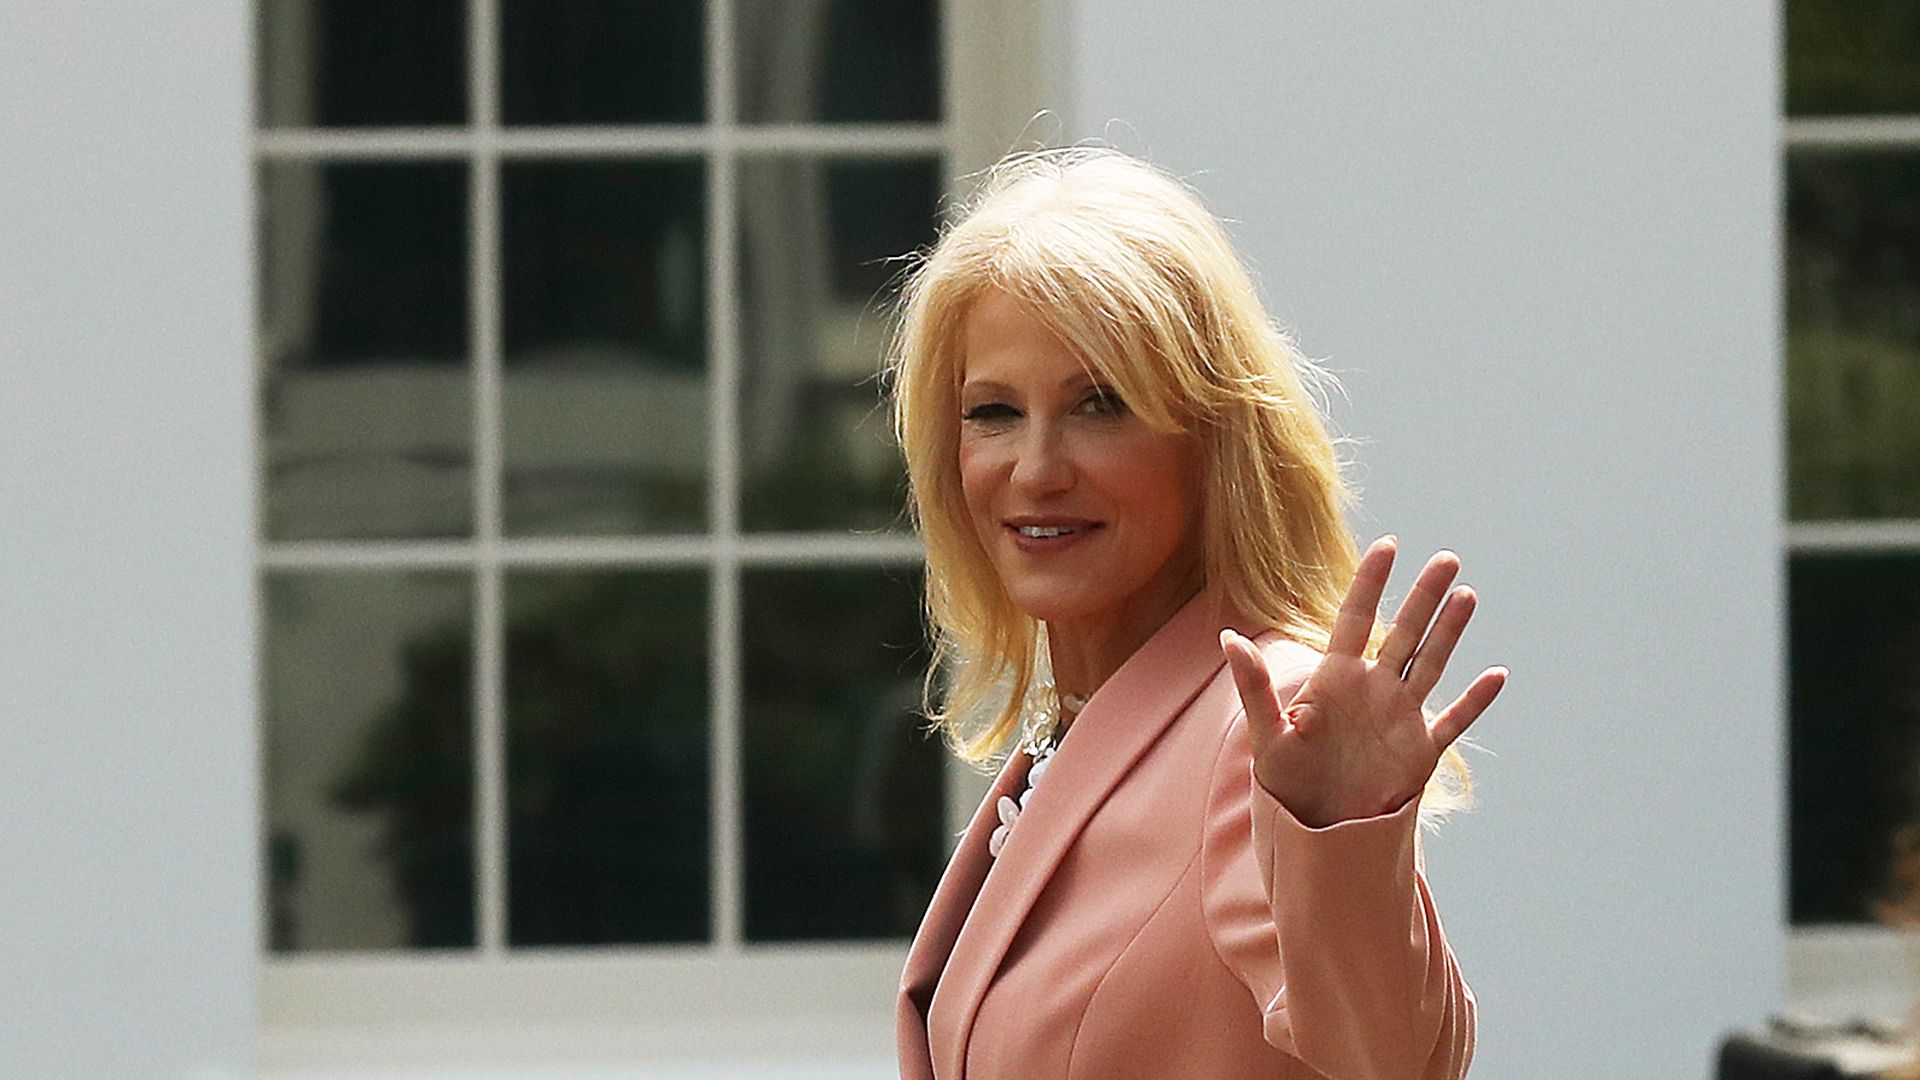 White House Counselor to the President Kellyanne Conway returns to the West Wing after talking to reporters outside the White House on August 21